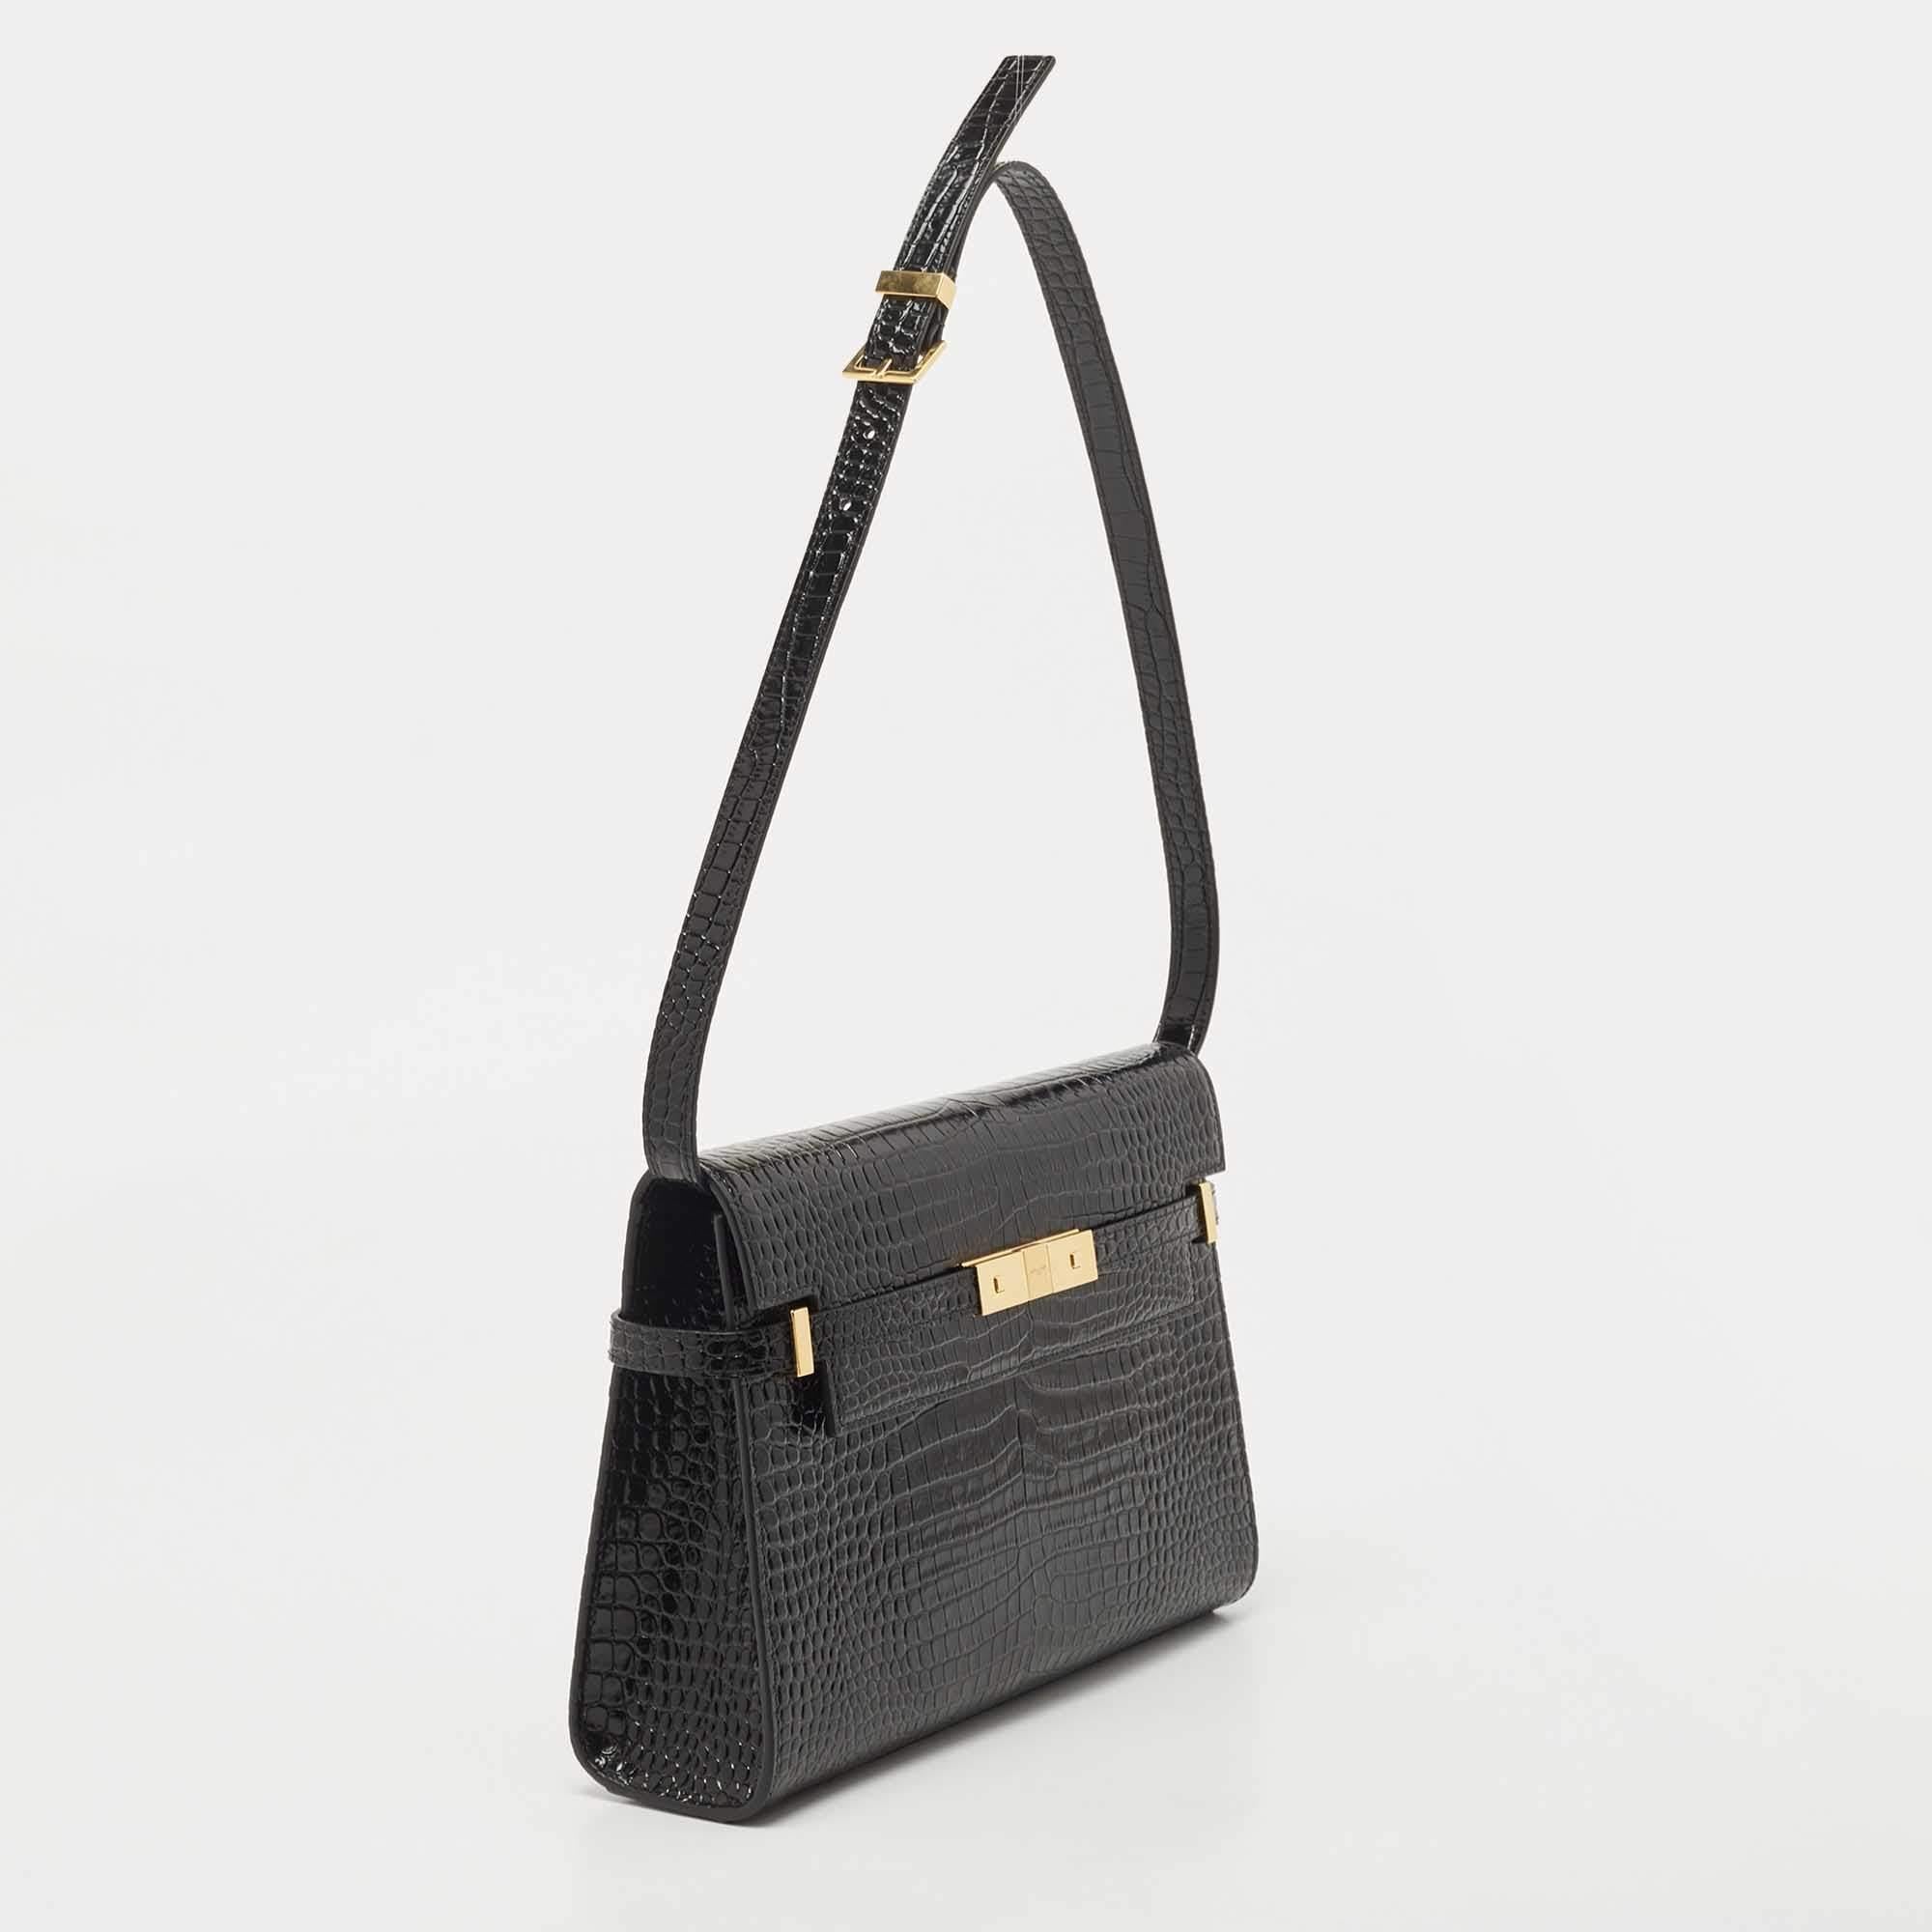 The Saint Laurent Manhattan shoulder bag is a luxurious and sophisticated accessory. Crafted from high-quality black croc-embossed leather, it exudes elegance and style. The design features a sleek silhouette, a fold-over flap with magnetic closure,